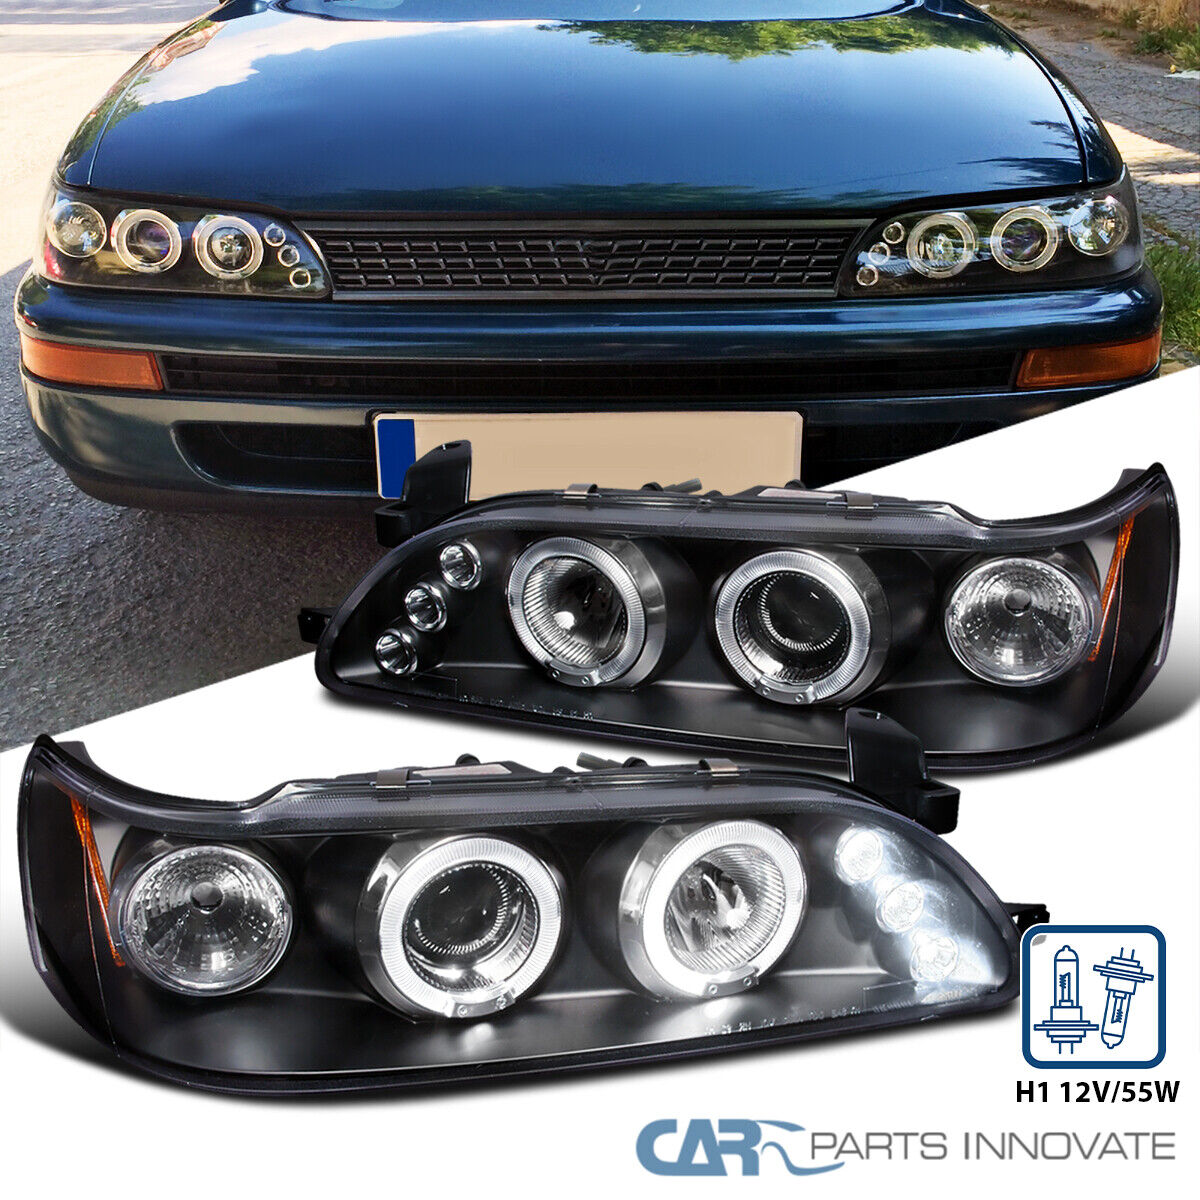 Black Fits 1993-1997 Toyota Corolla LED Halo Projector Headlights Left+Right